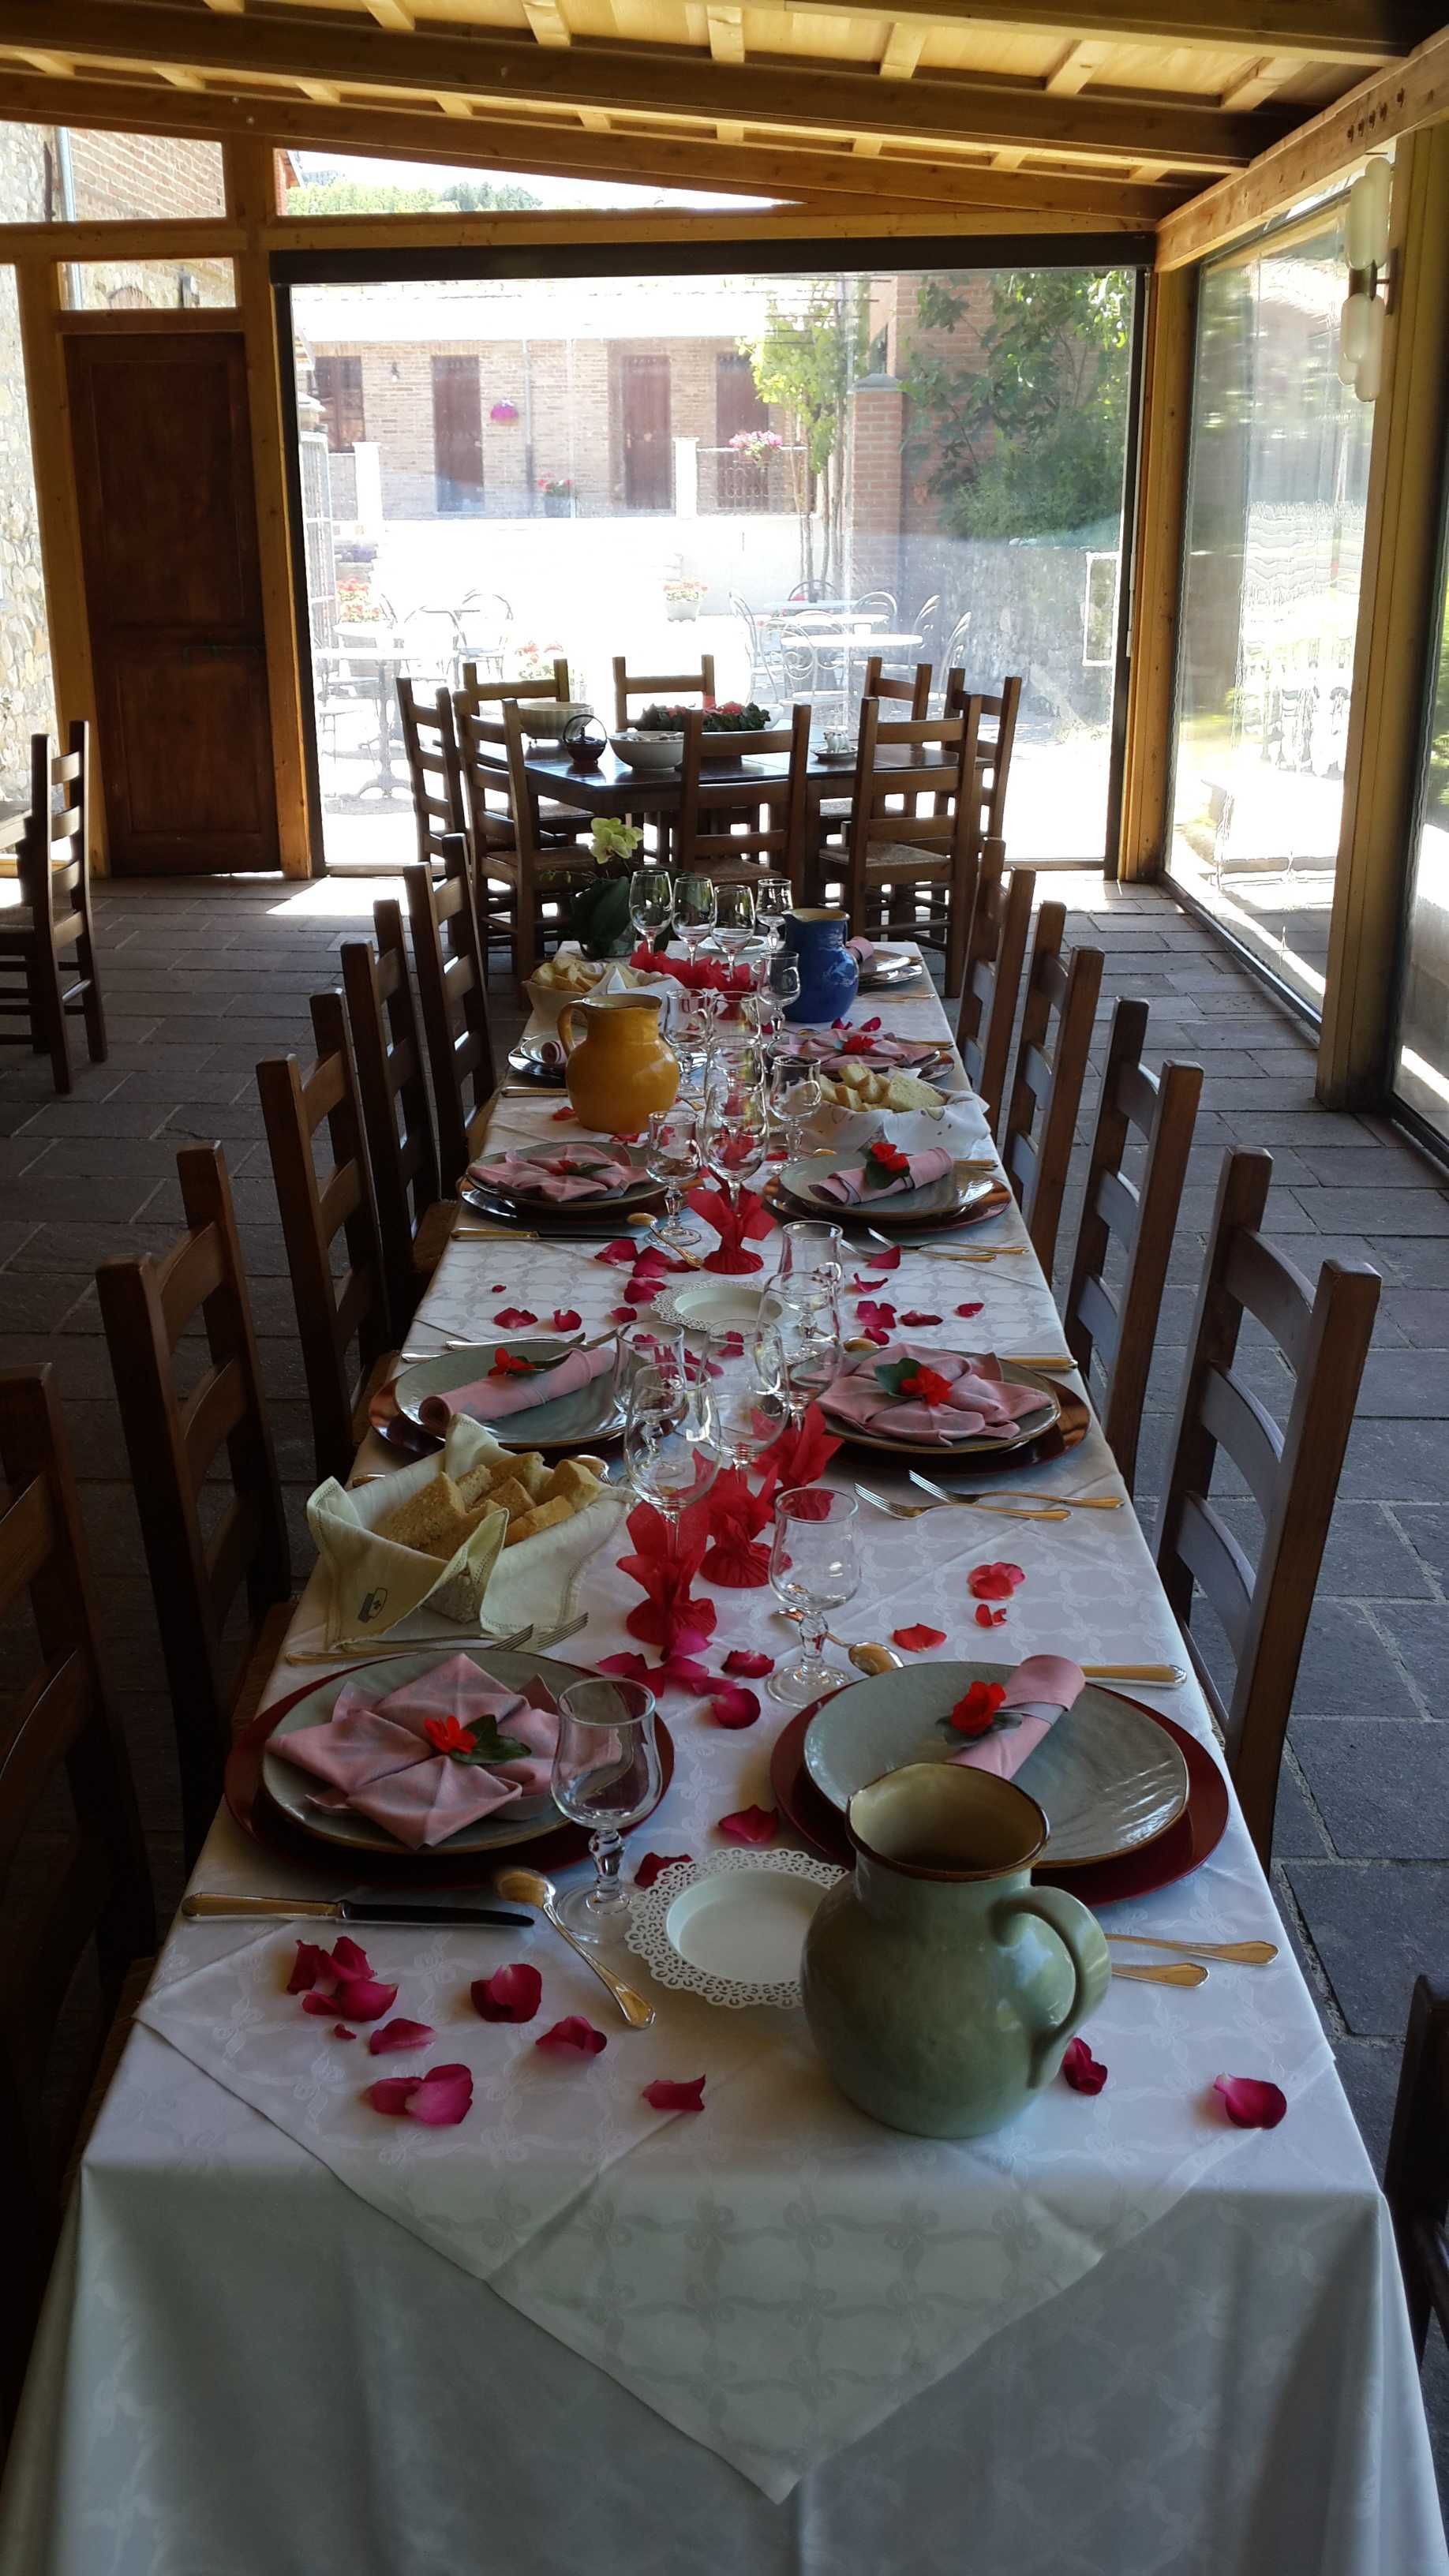 The table is set for our long lunch at the gorgeous Tenuta Terensano, which features on our Fine Food Wine and Wonders Tour and is the accommodation for the first 5 nights on our Treasures of Tuscany, Umbria and Lombardy Tour.